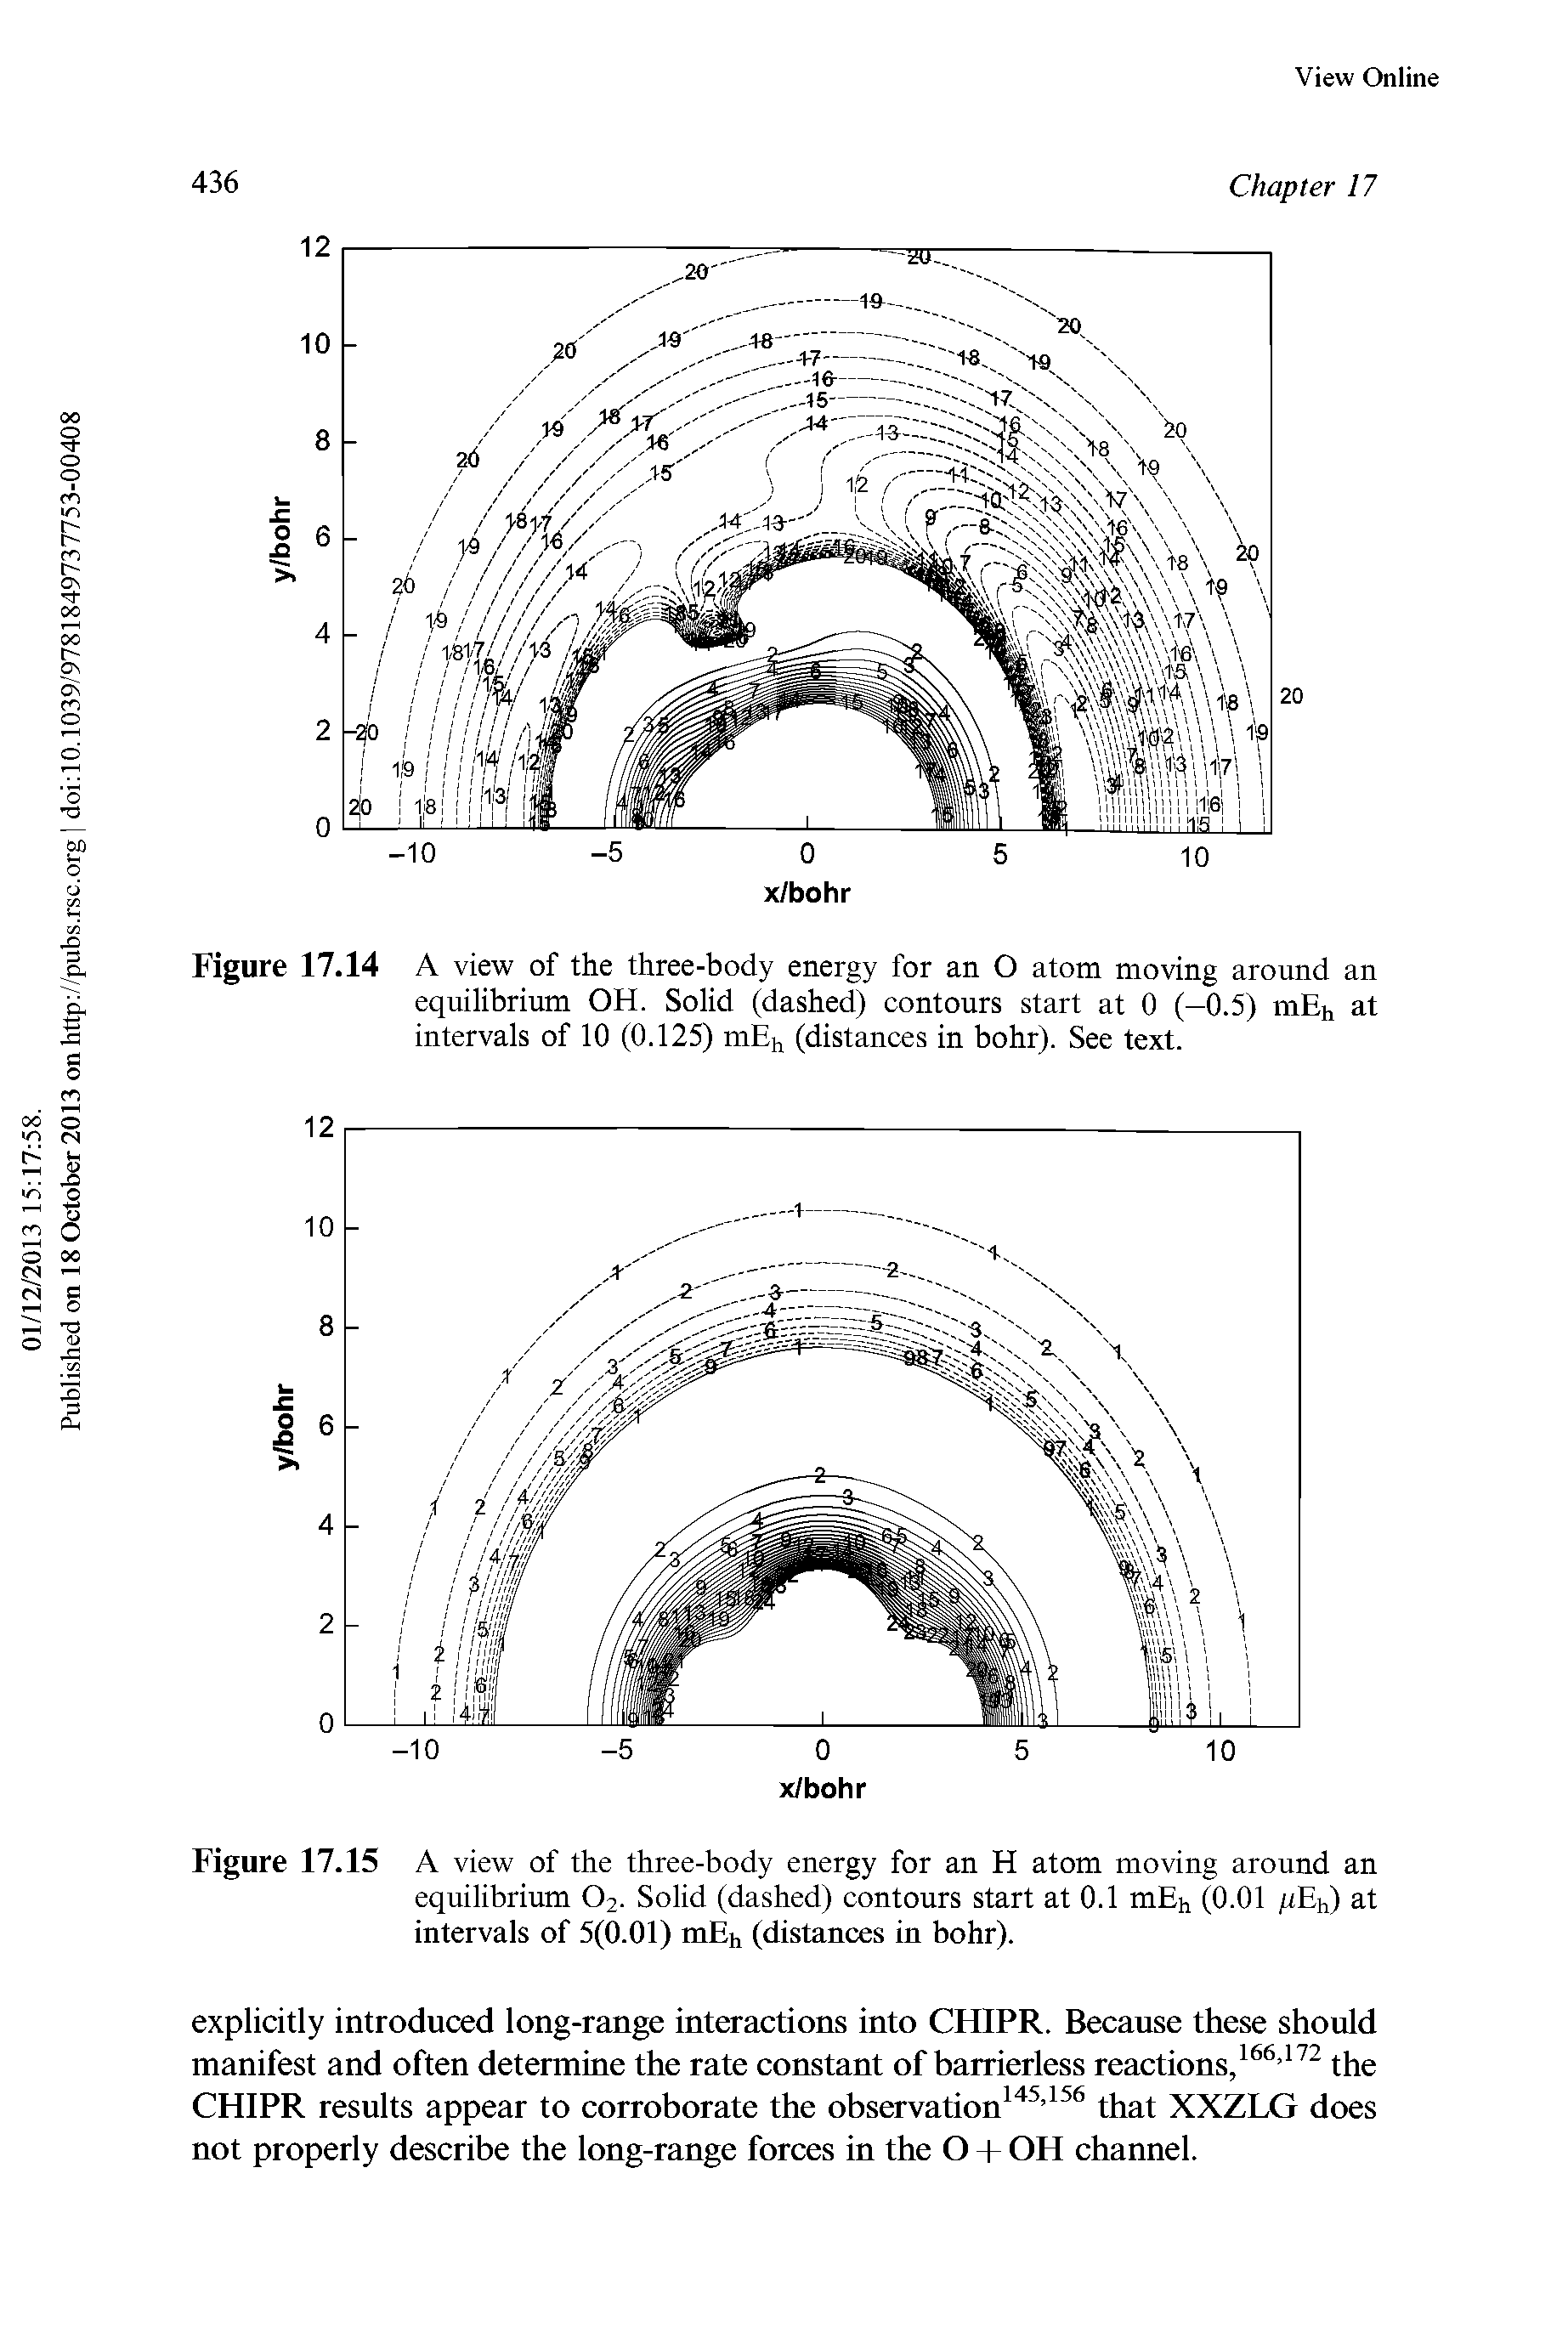 Figure 17.14 A view of the three-body energy for an O atom moving around an equilibrimn OH. Solid (dashed) contours start at 0 (—0.5) mE], at intervals of 10 (0.125) mEi, (distances in bohr). See text.